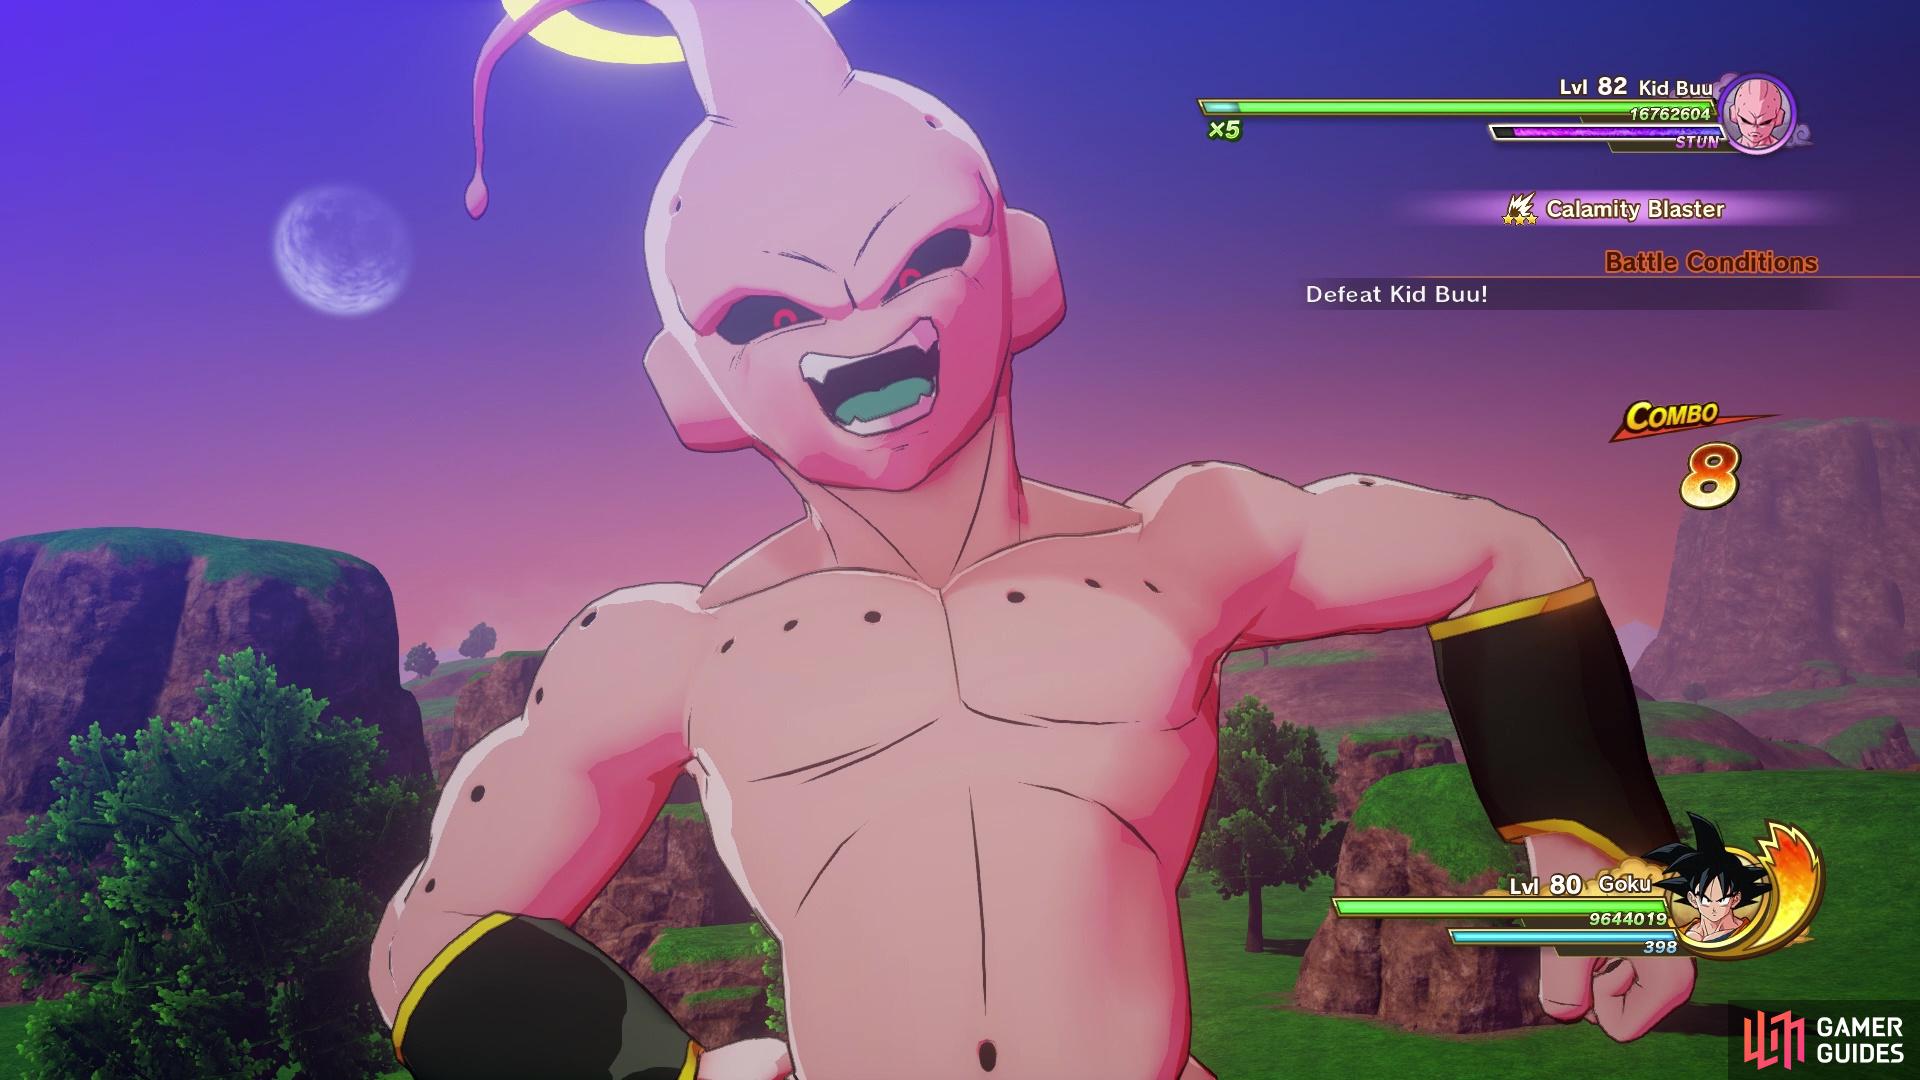 Kid Buu will always open up with Calamity Blaster